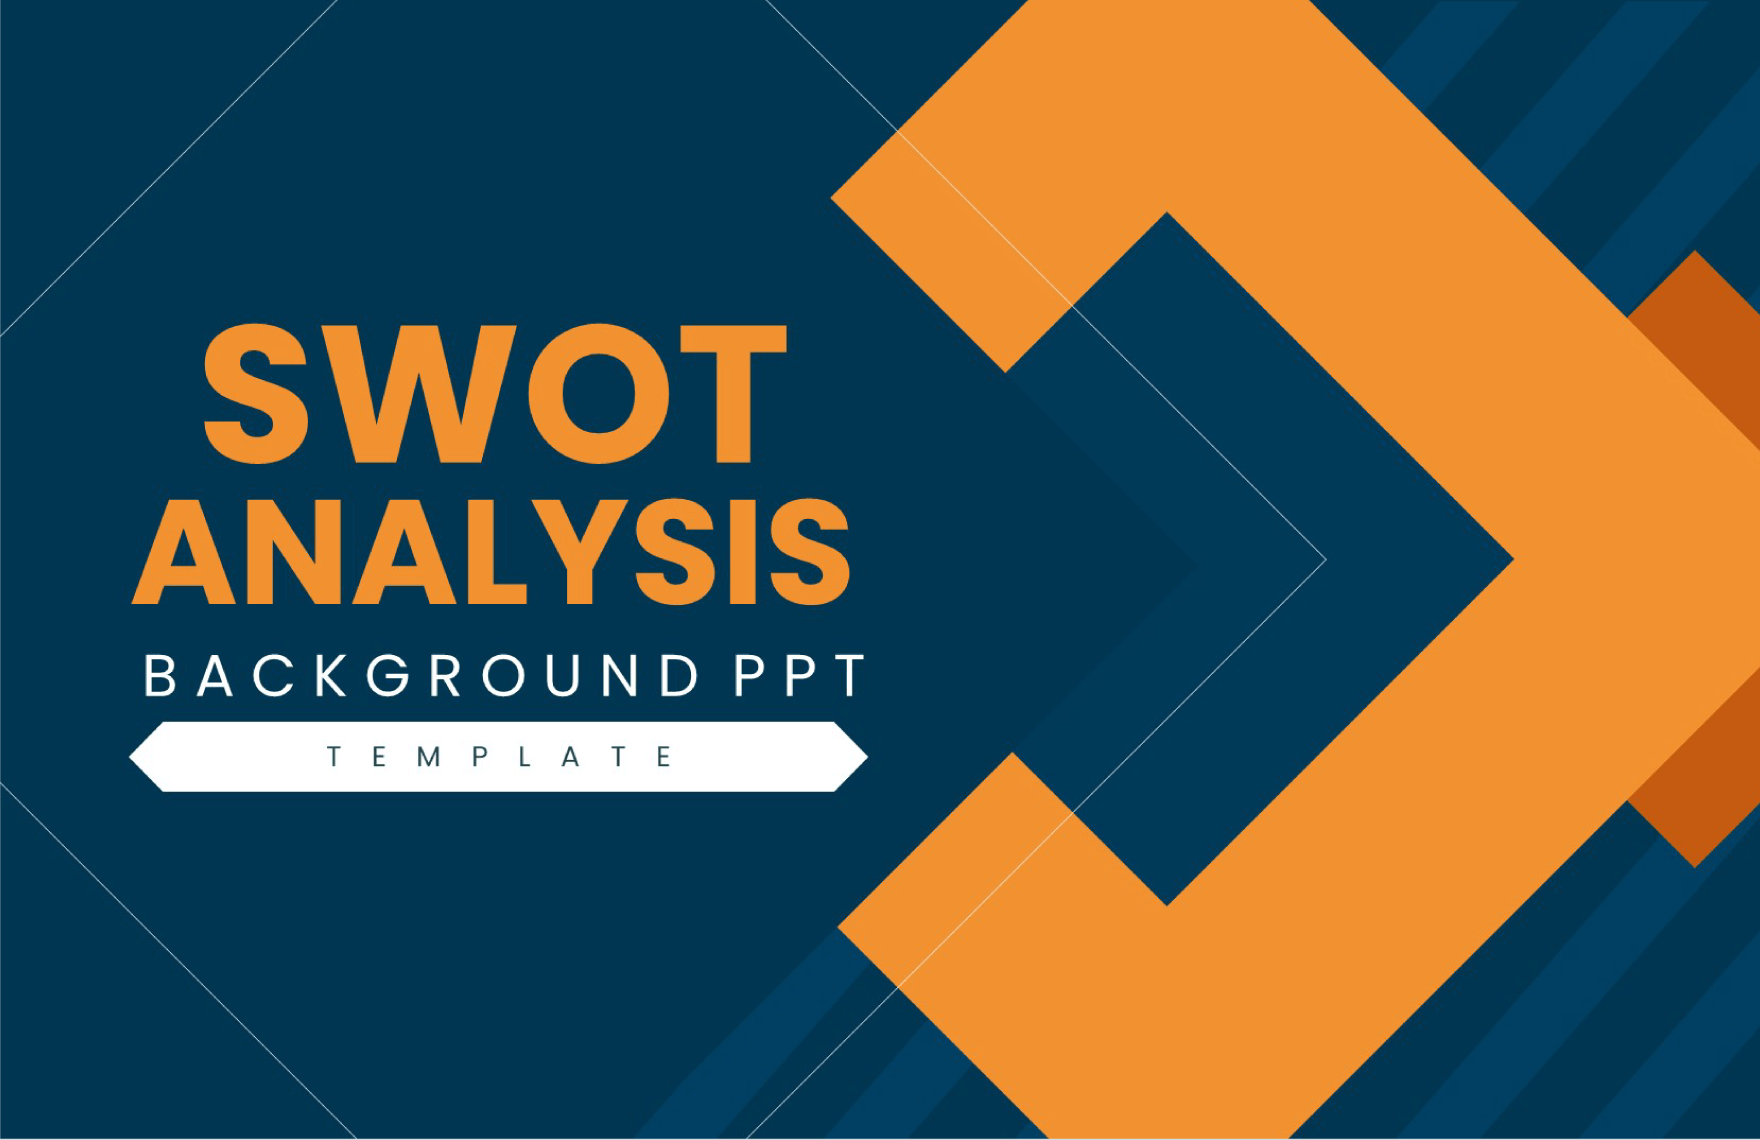 SWOT Analysis Background PPT Template